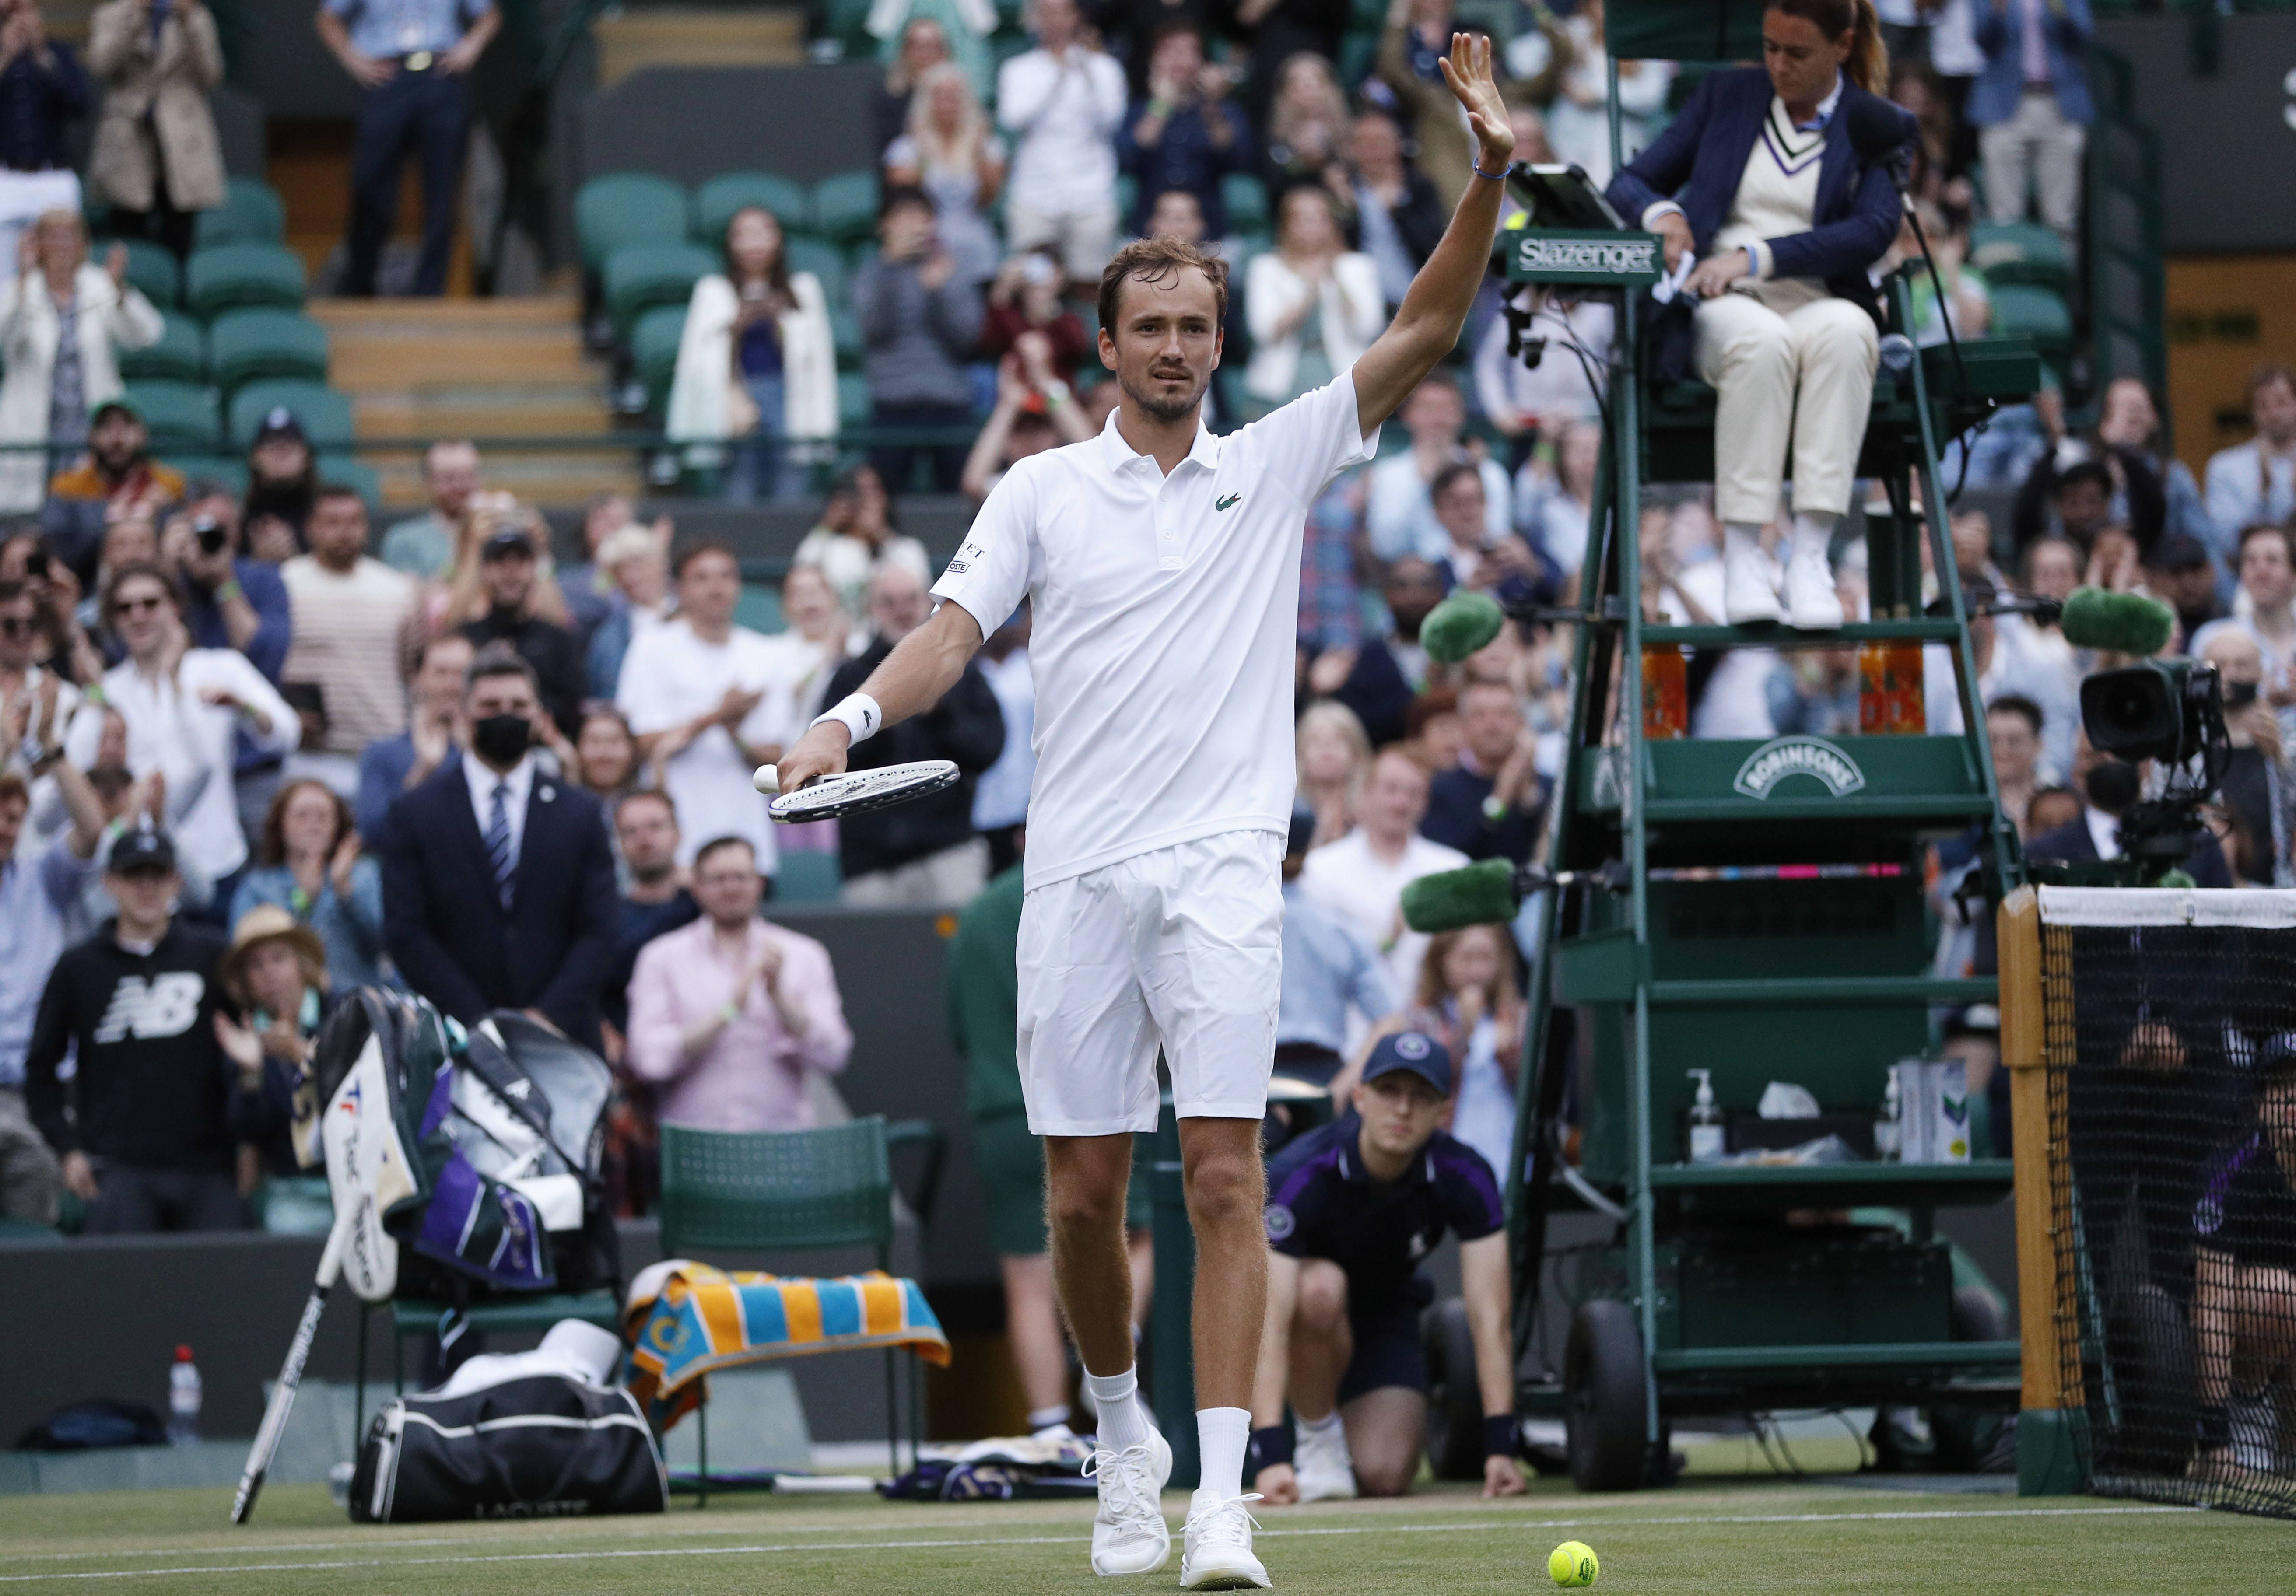 Return to the grass: Wimbledon lifted the ban on Russian and Belarusian tennis players.